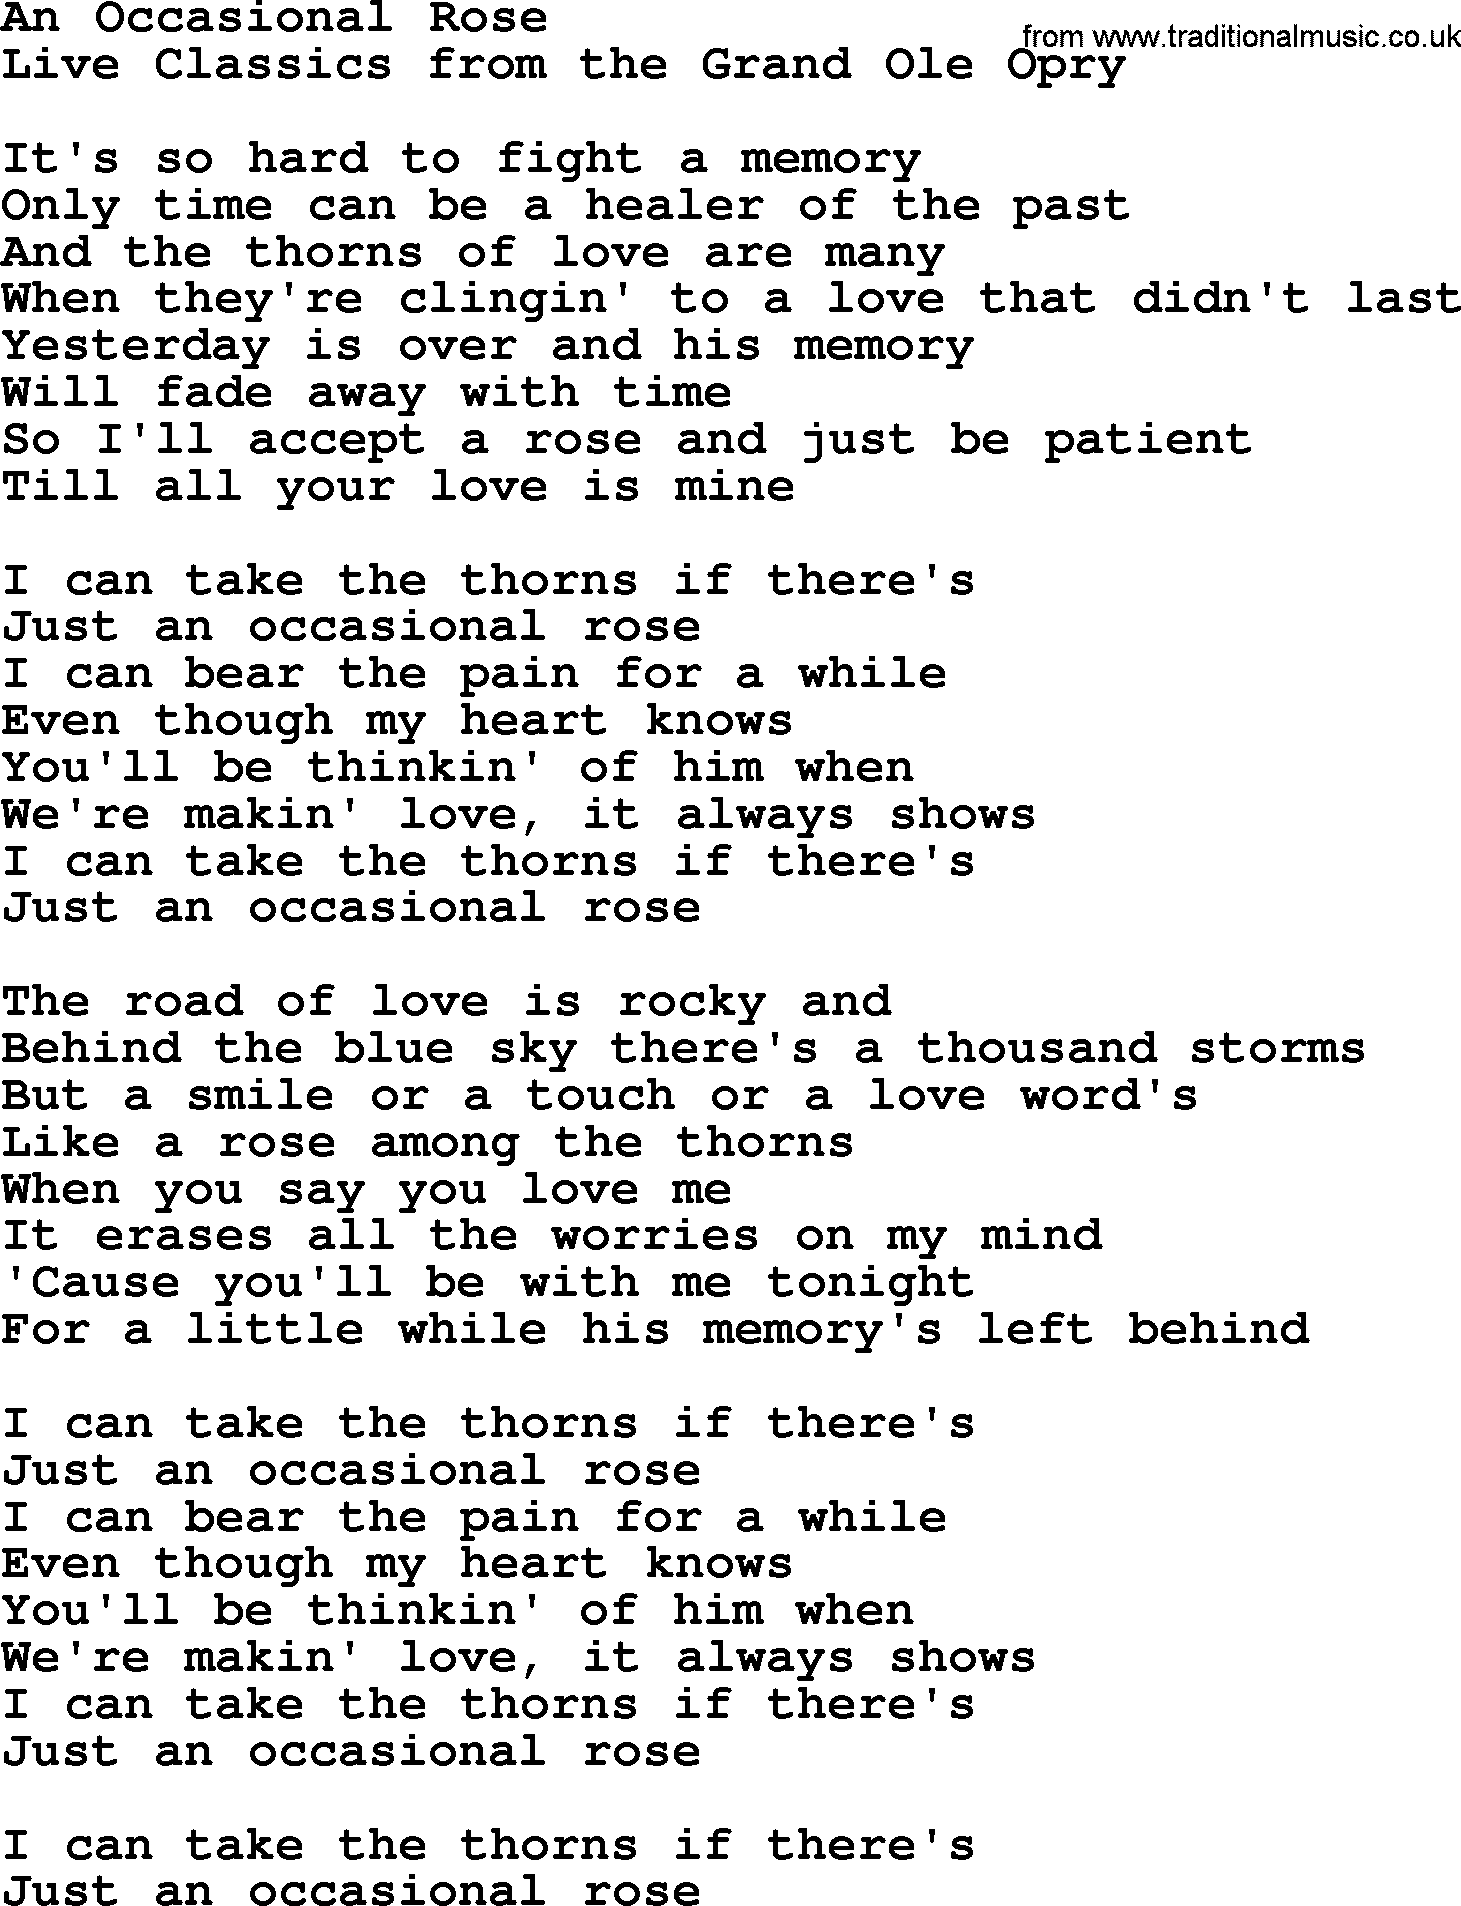 Marty Robbins song: An Occasional Rose, lyrics